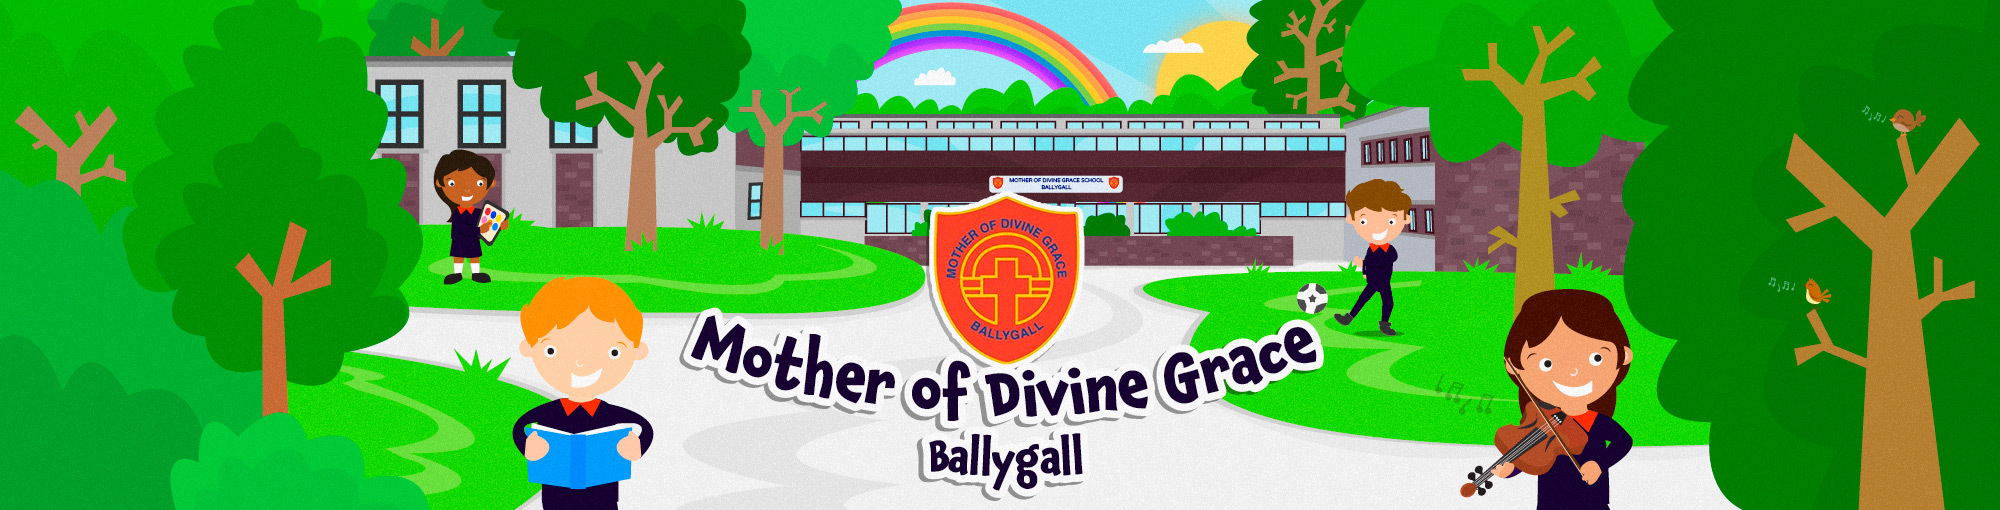 Mother of Divine Grace Primary School, Ballygall, Dublin 11